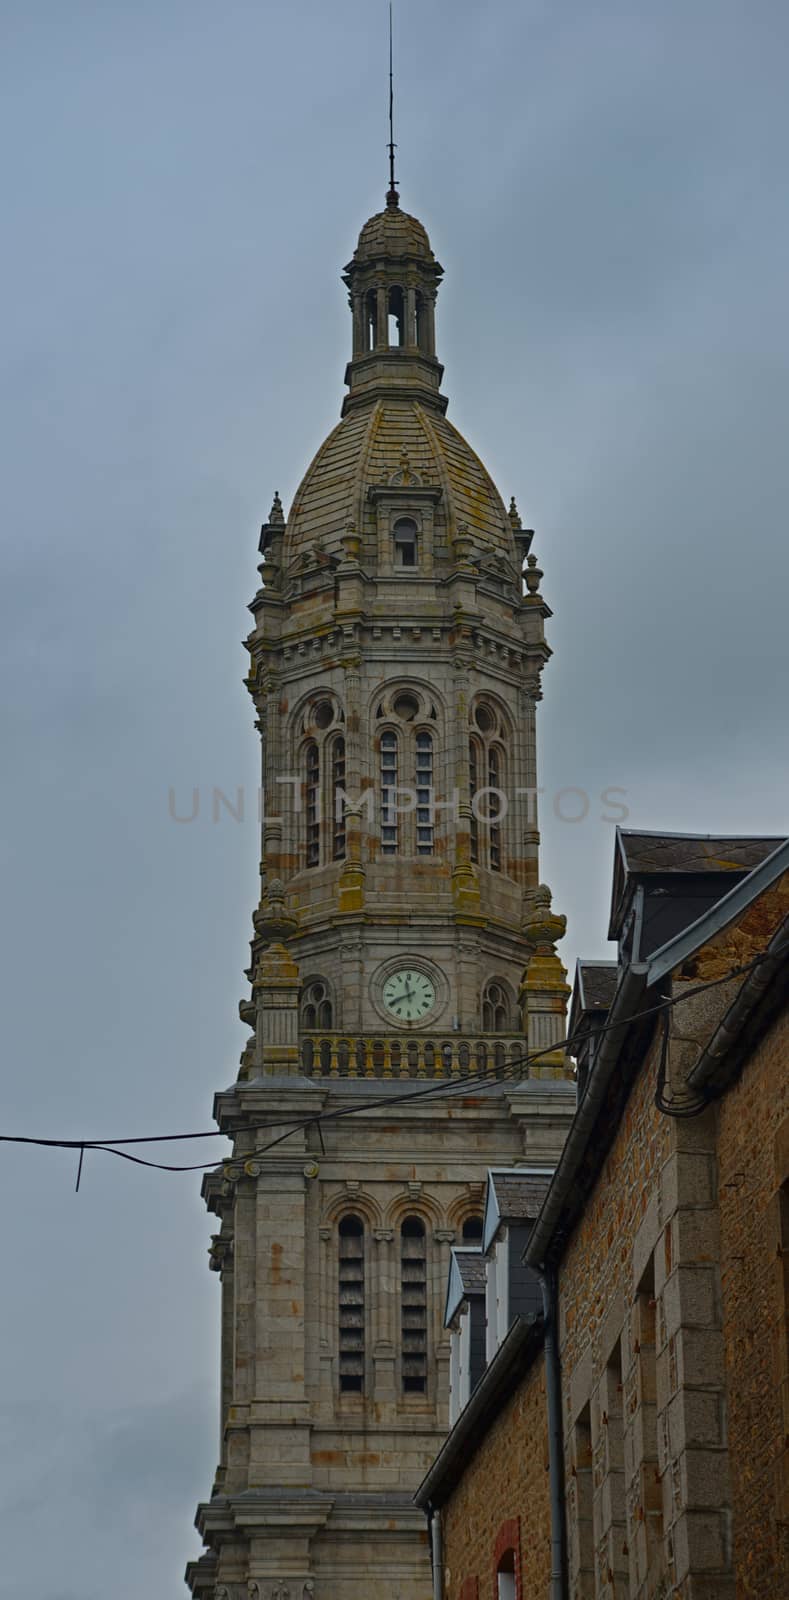 Medieval tall clock tower made out of stone in Avranches, France by sheriffkule